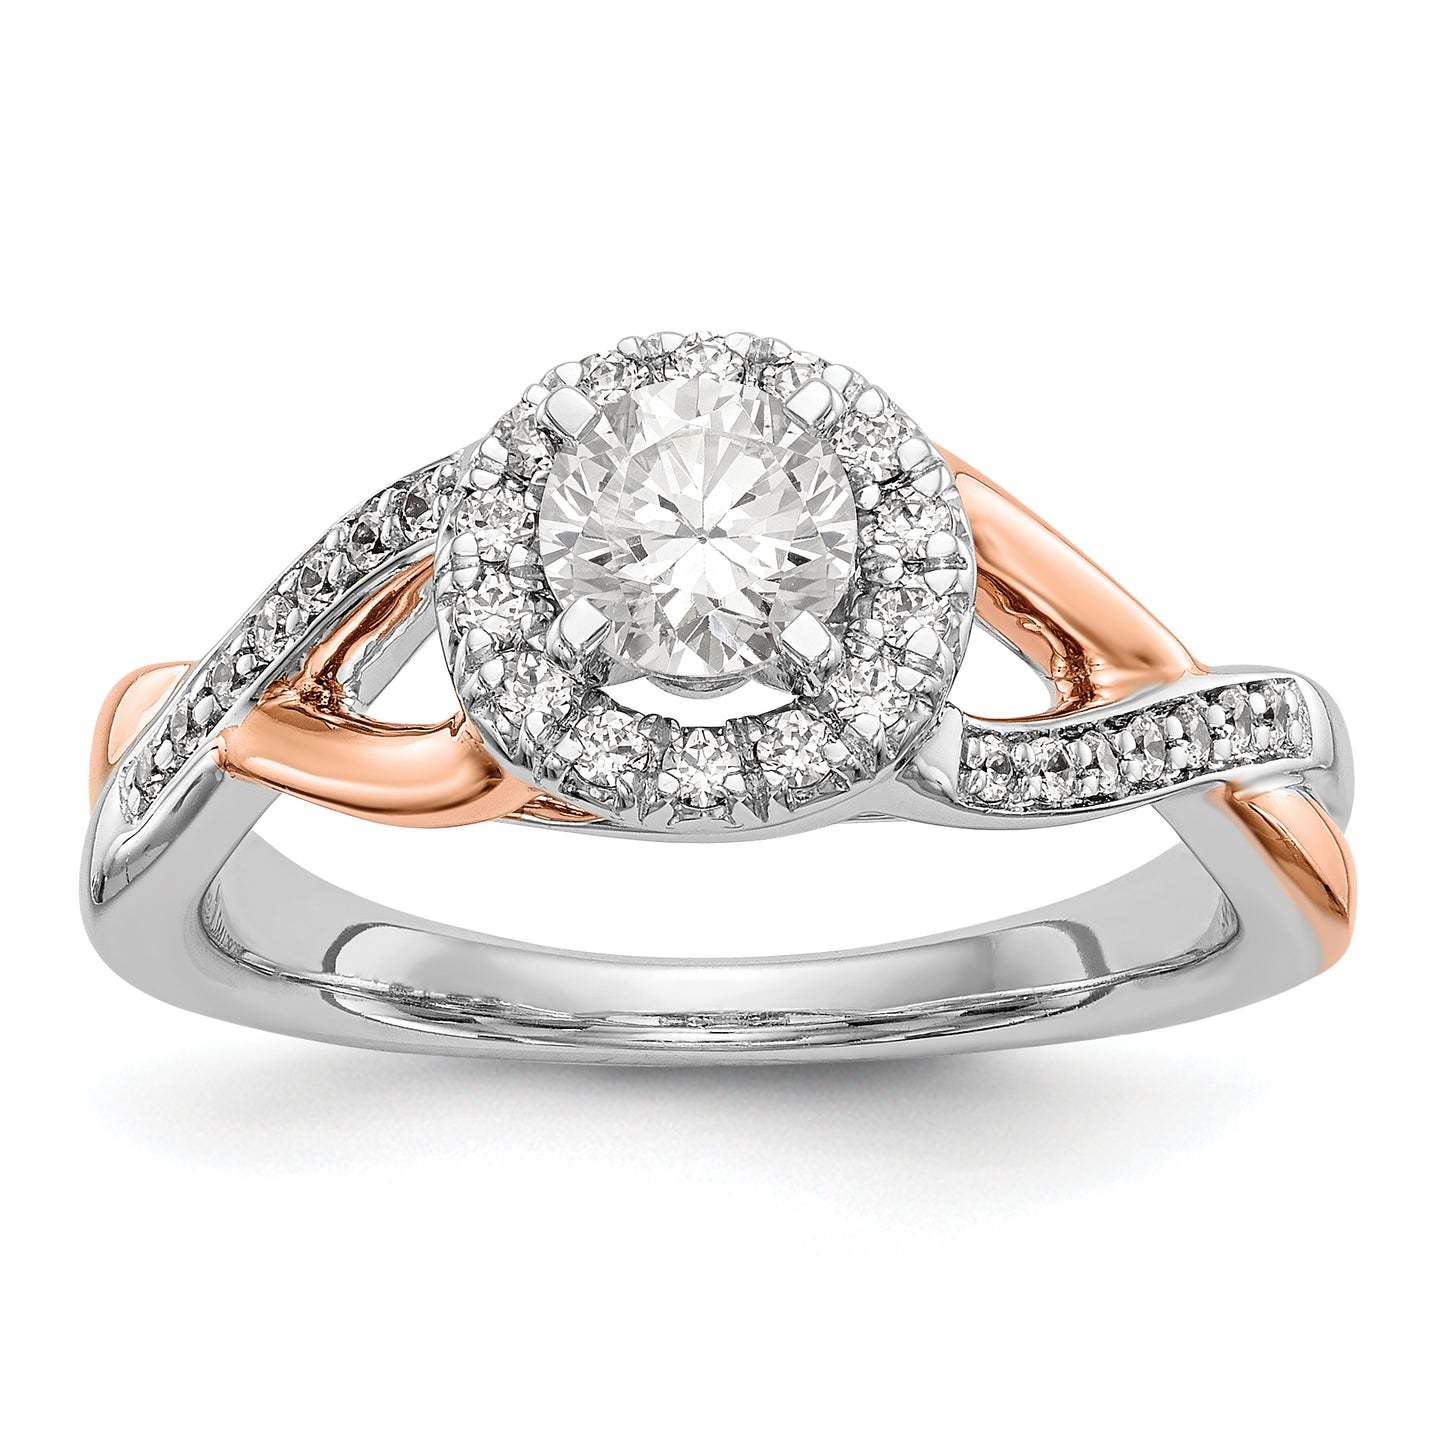 14K Rose and White Gold Round Simulated Diamond Halo Engagement Ring